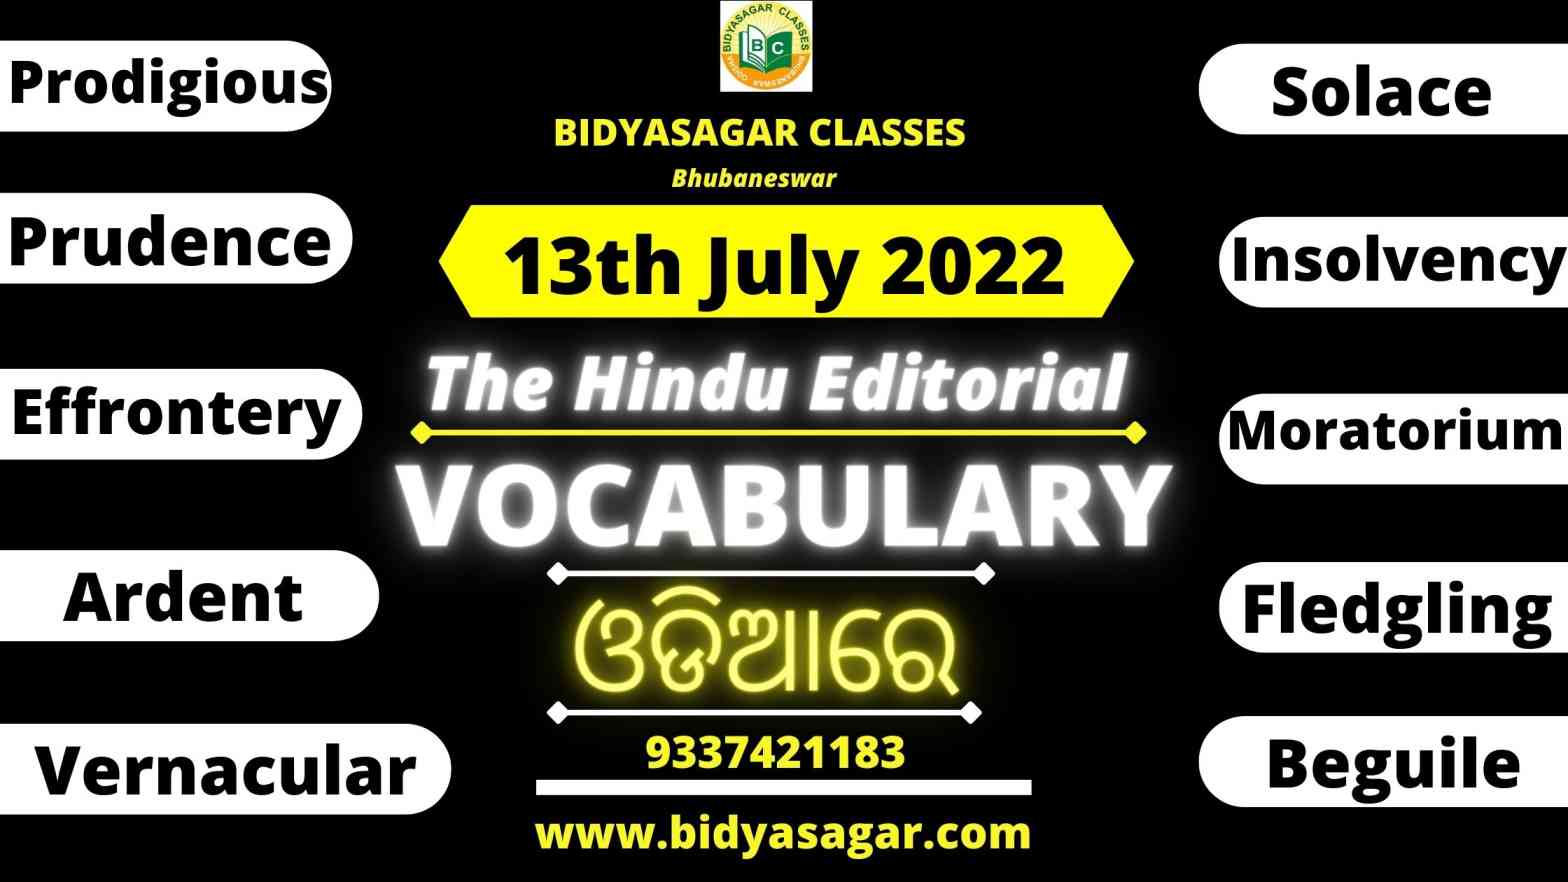 The Hindu Editorial Vocabulary of 13th July 2022